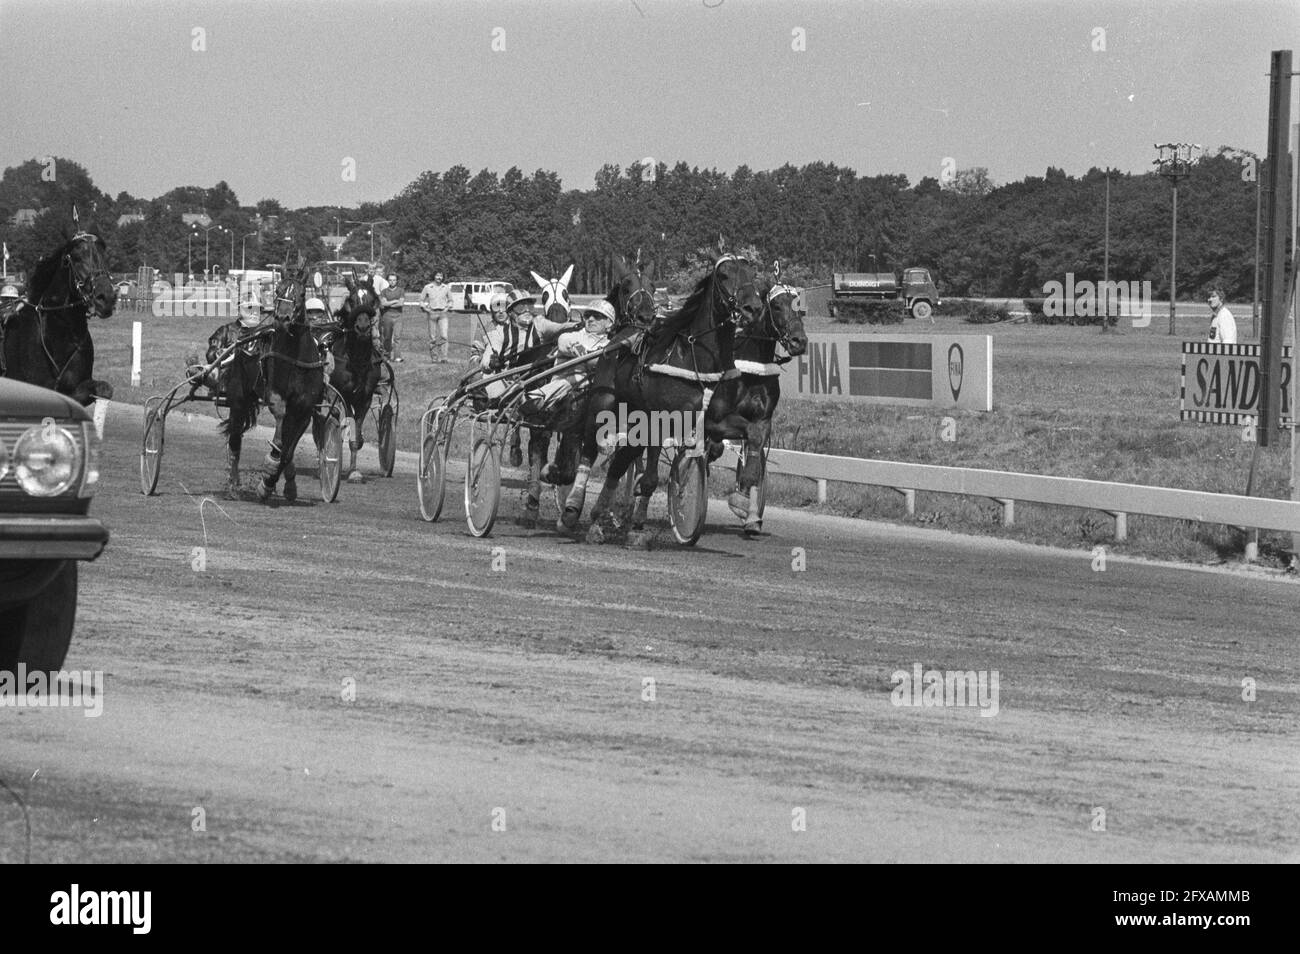 Duindigt, derby for trotters; winner is No. 14 Uranis ter Lune with pikeur De Wrede, August 2, 1981, trotting, equestrian, sport, The Netherlands, 20th century press agency photo, news to remember, documentary, historic photography 1945-1990, visual stories, human history of the Twentieth Century, capturing moments in time Stock Photo